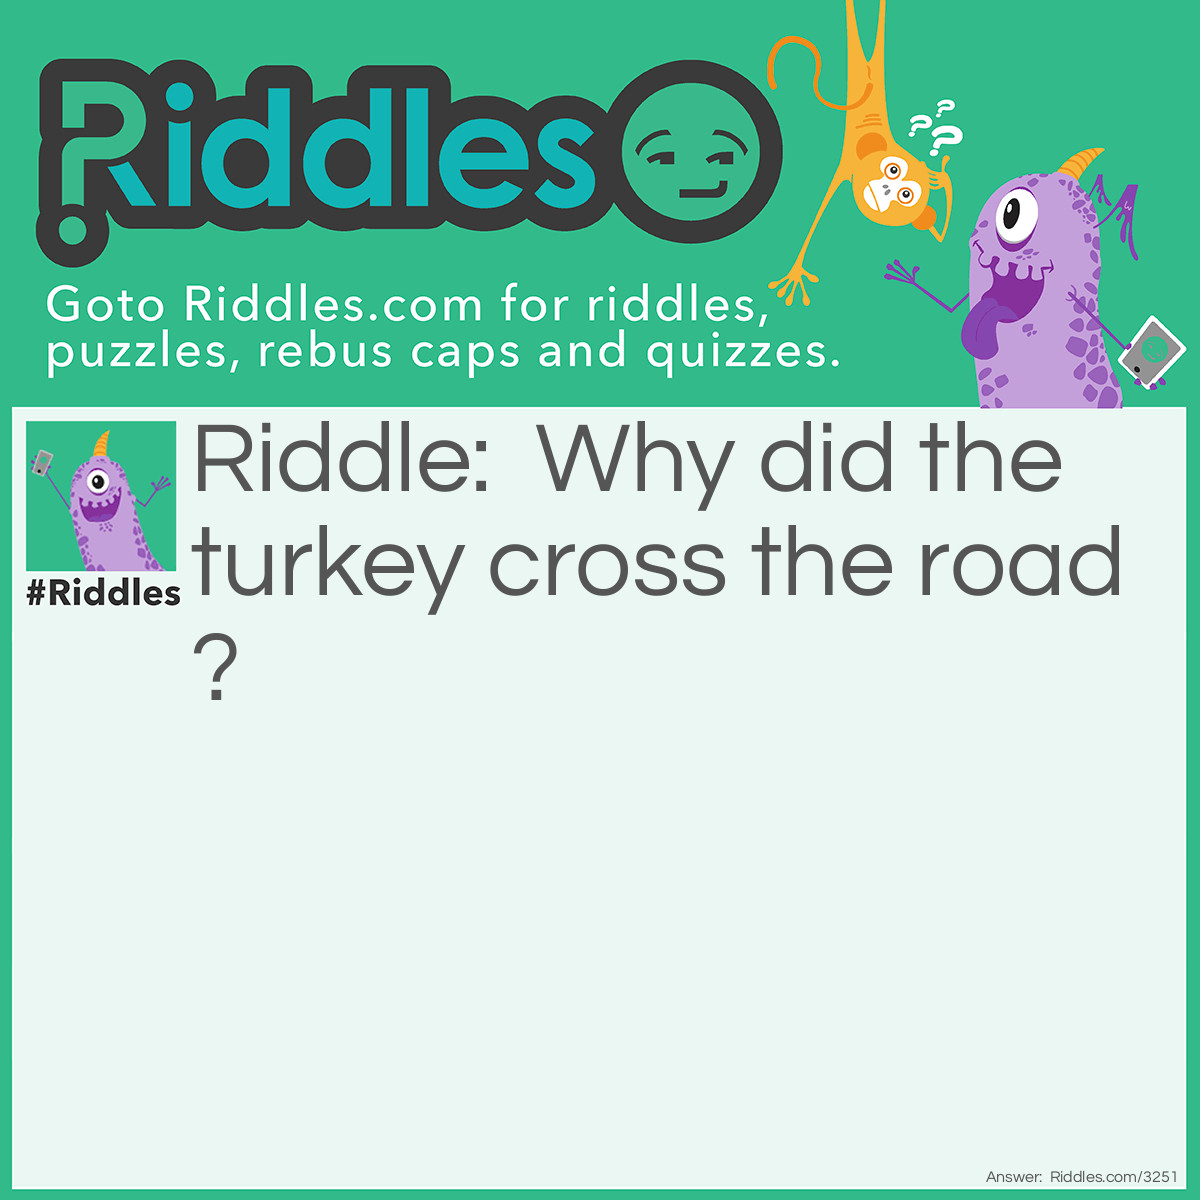 Riddle: Why did the turkey cross the road? Answer: To prove he wasn't chicken.